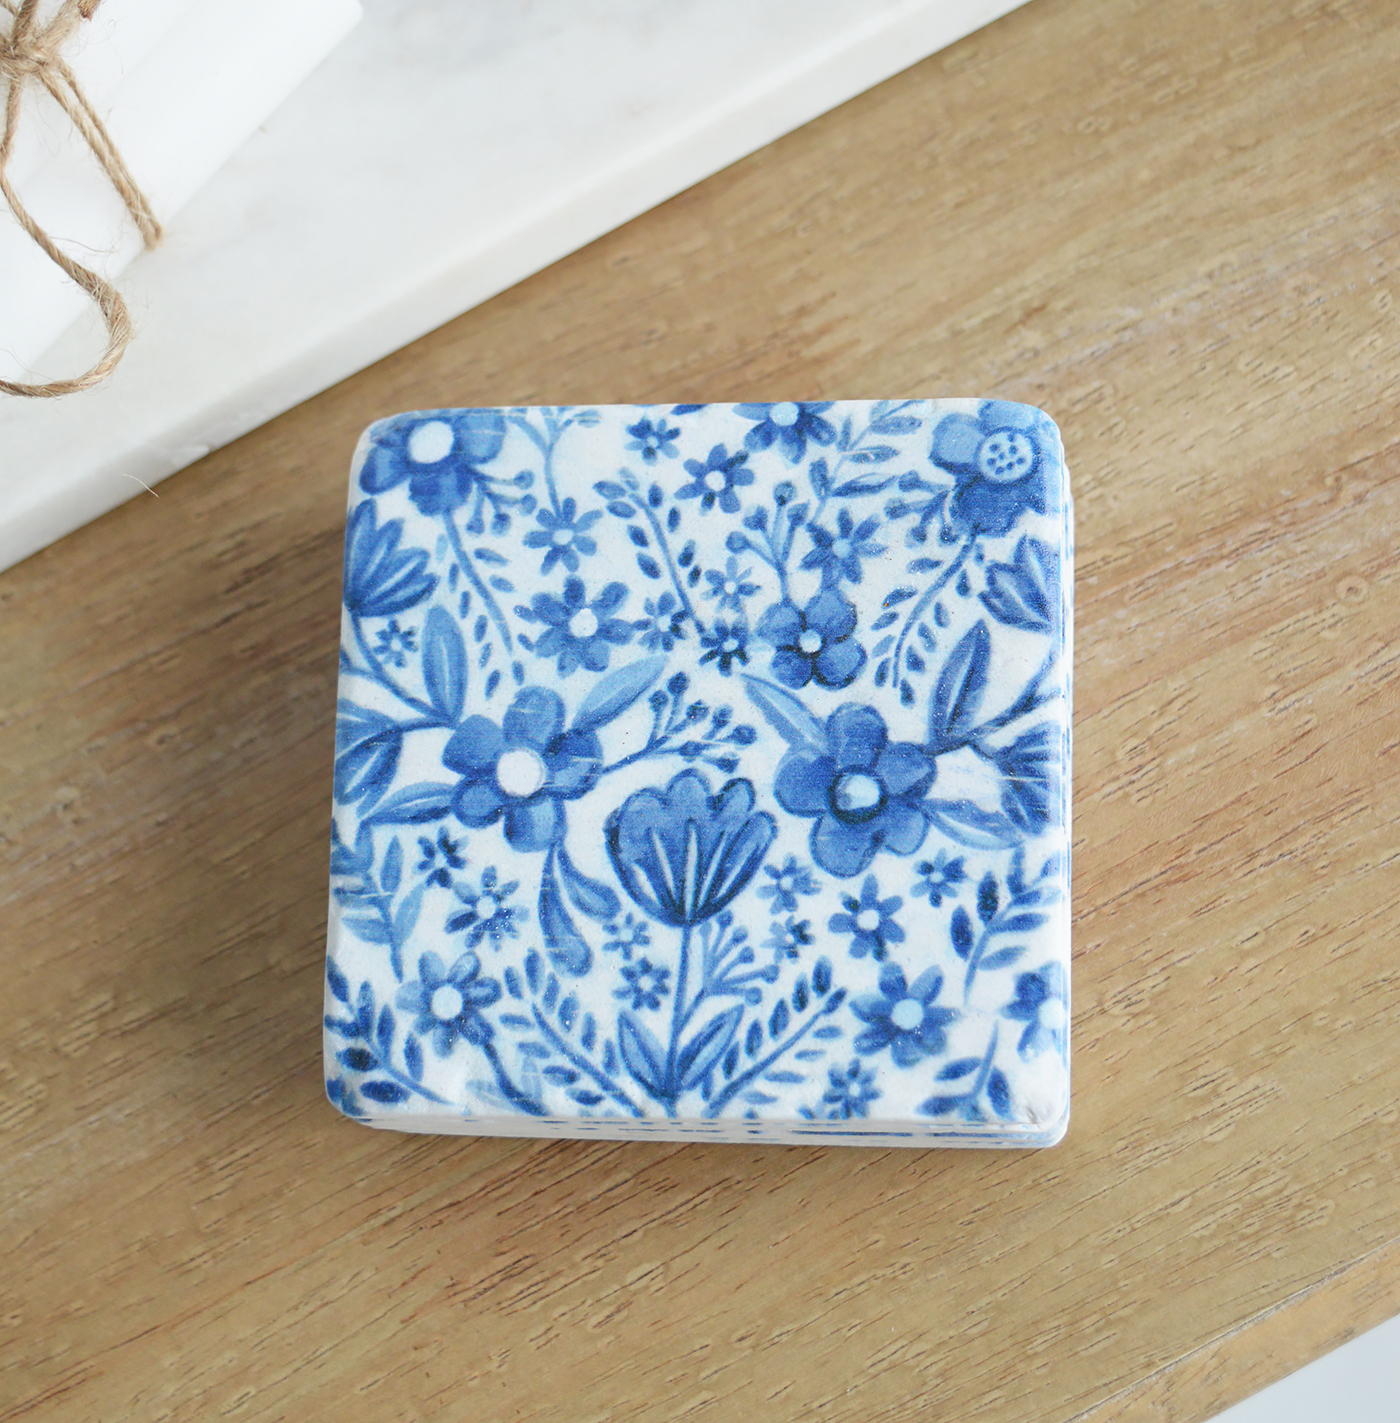 Blue and white floral coasters, perfect for both new England coastal and country interiors